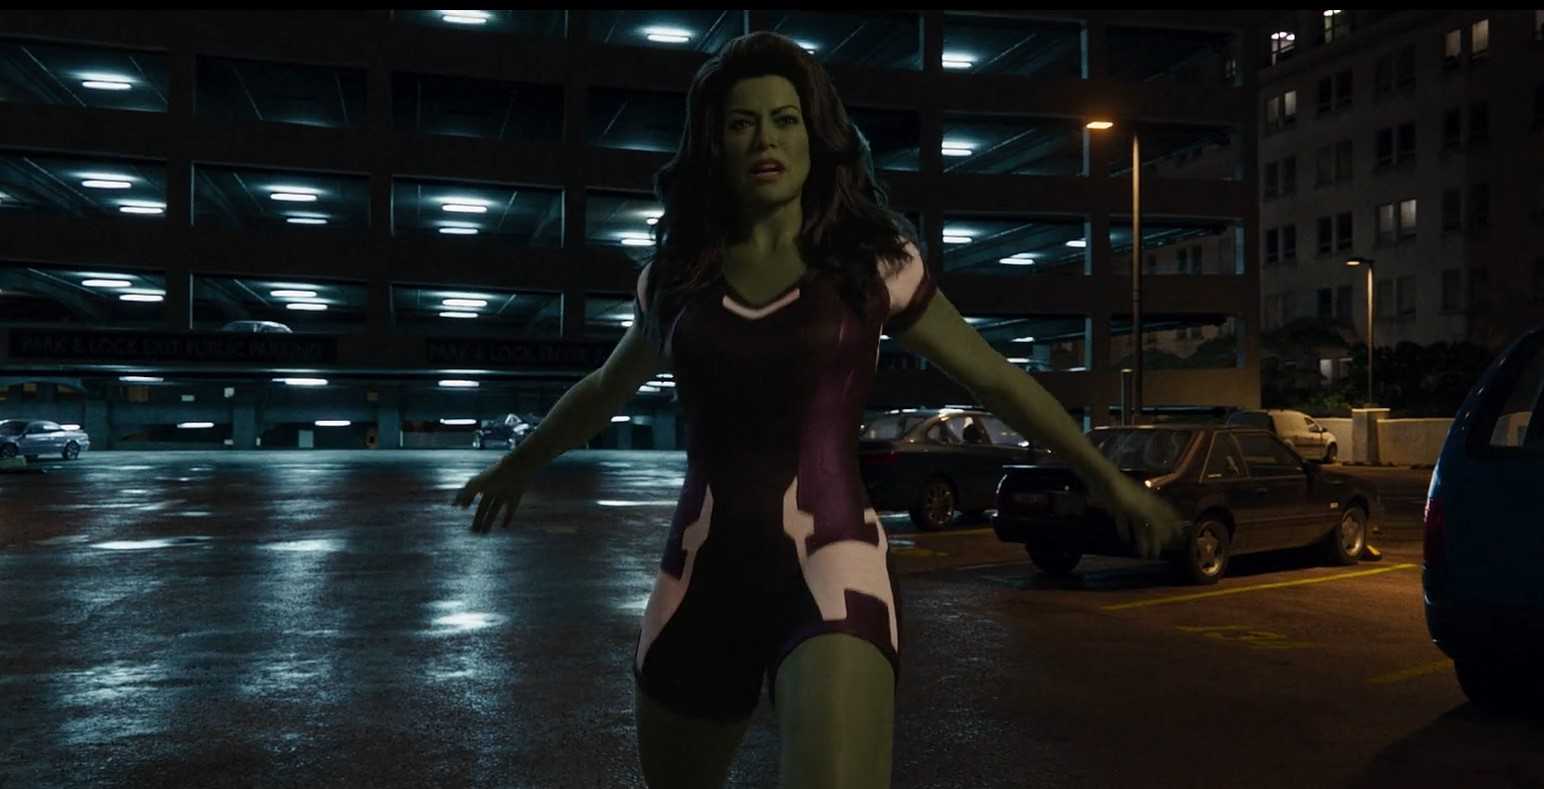 She-Hulk: Attorney at Law season finale promo teases the return of Bruce Banner and an epic rematch